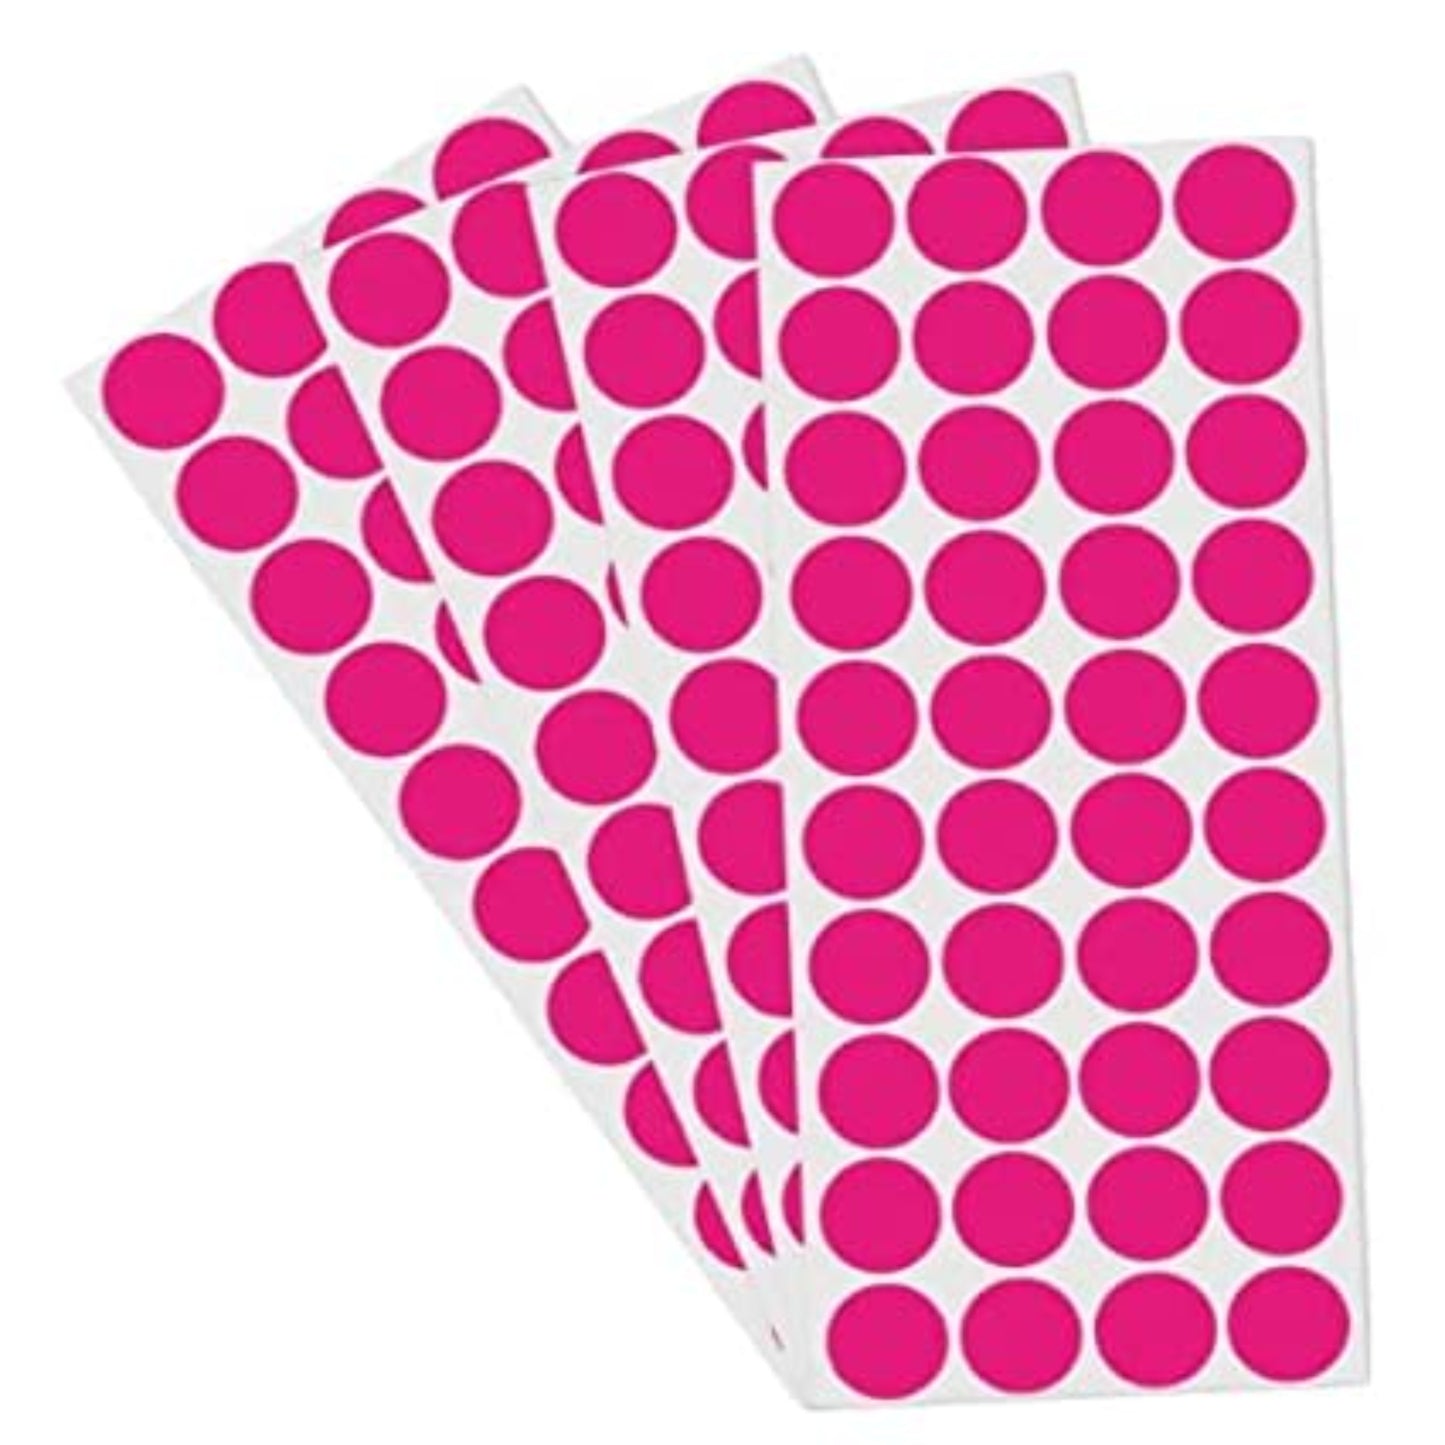 AccuPrints Pink Coloured Round Dots 10-mm or 1 cm or 0.37 inch Stickers for Art and Craft & Games